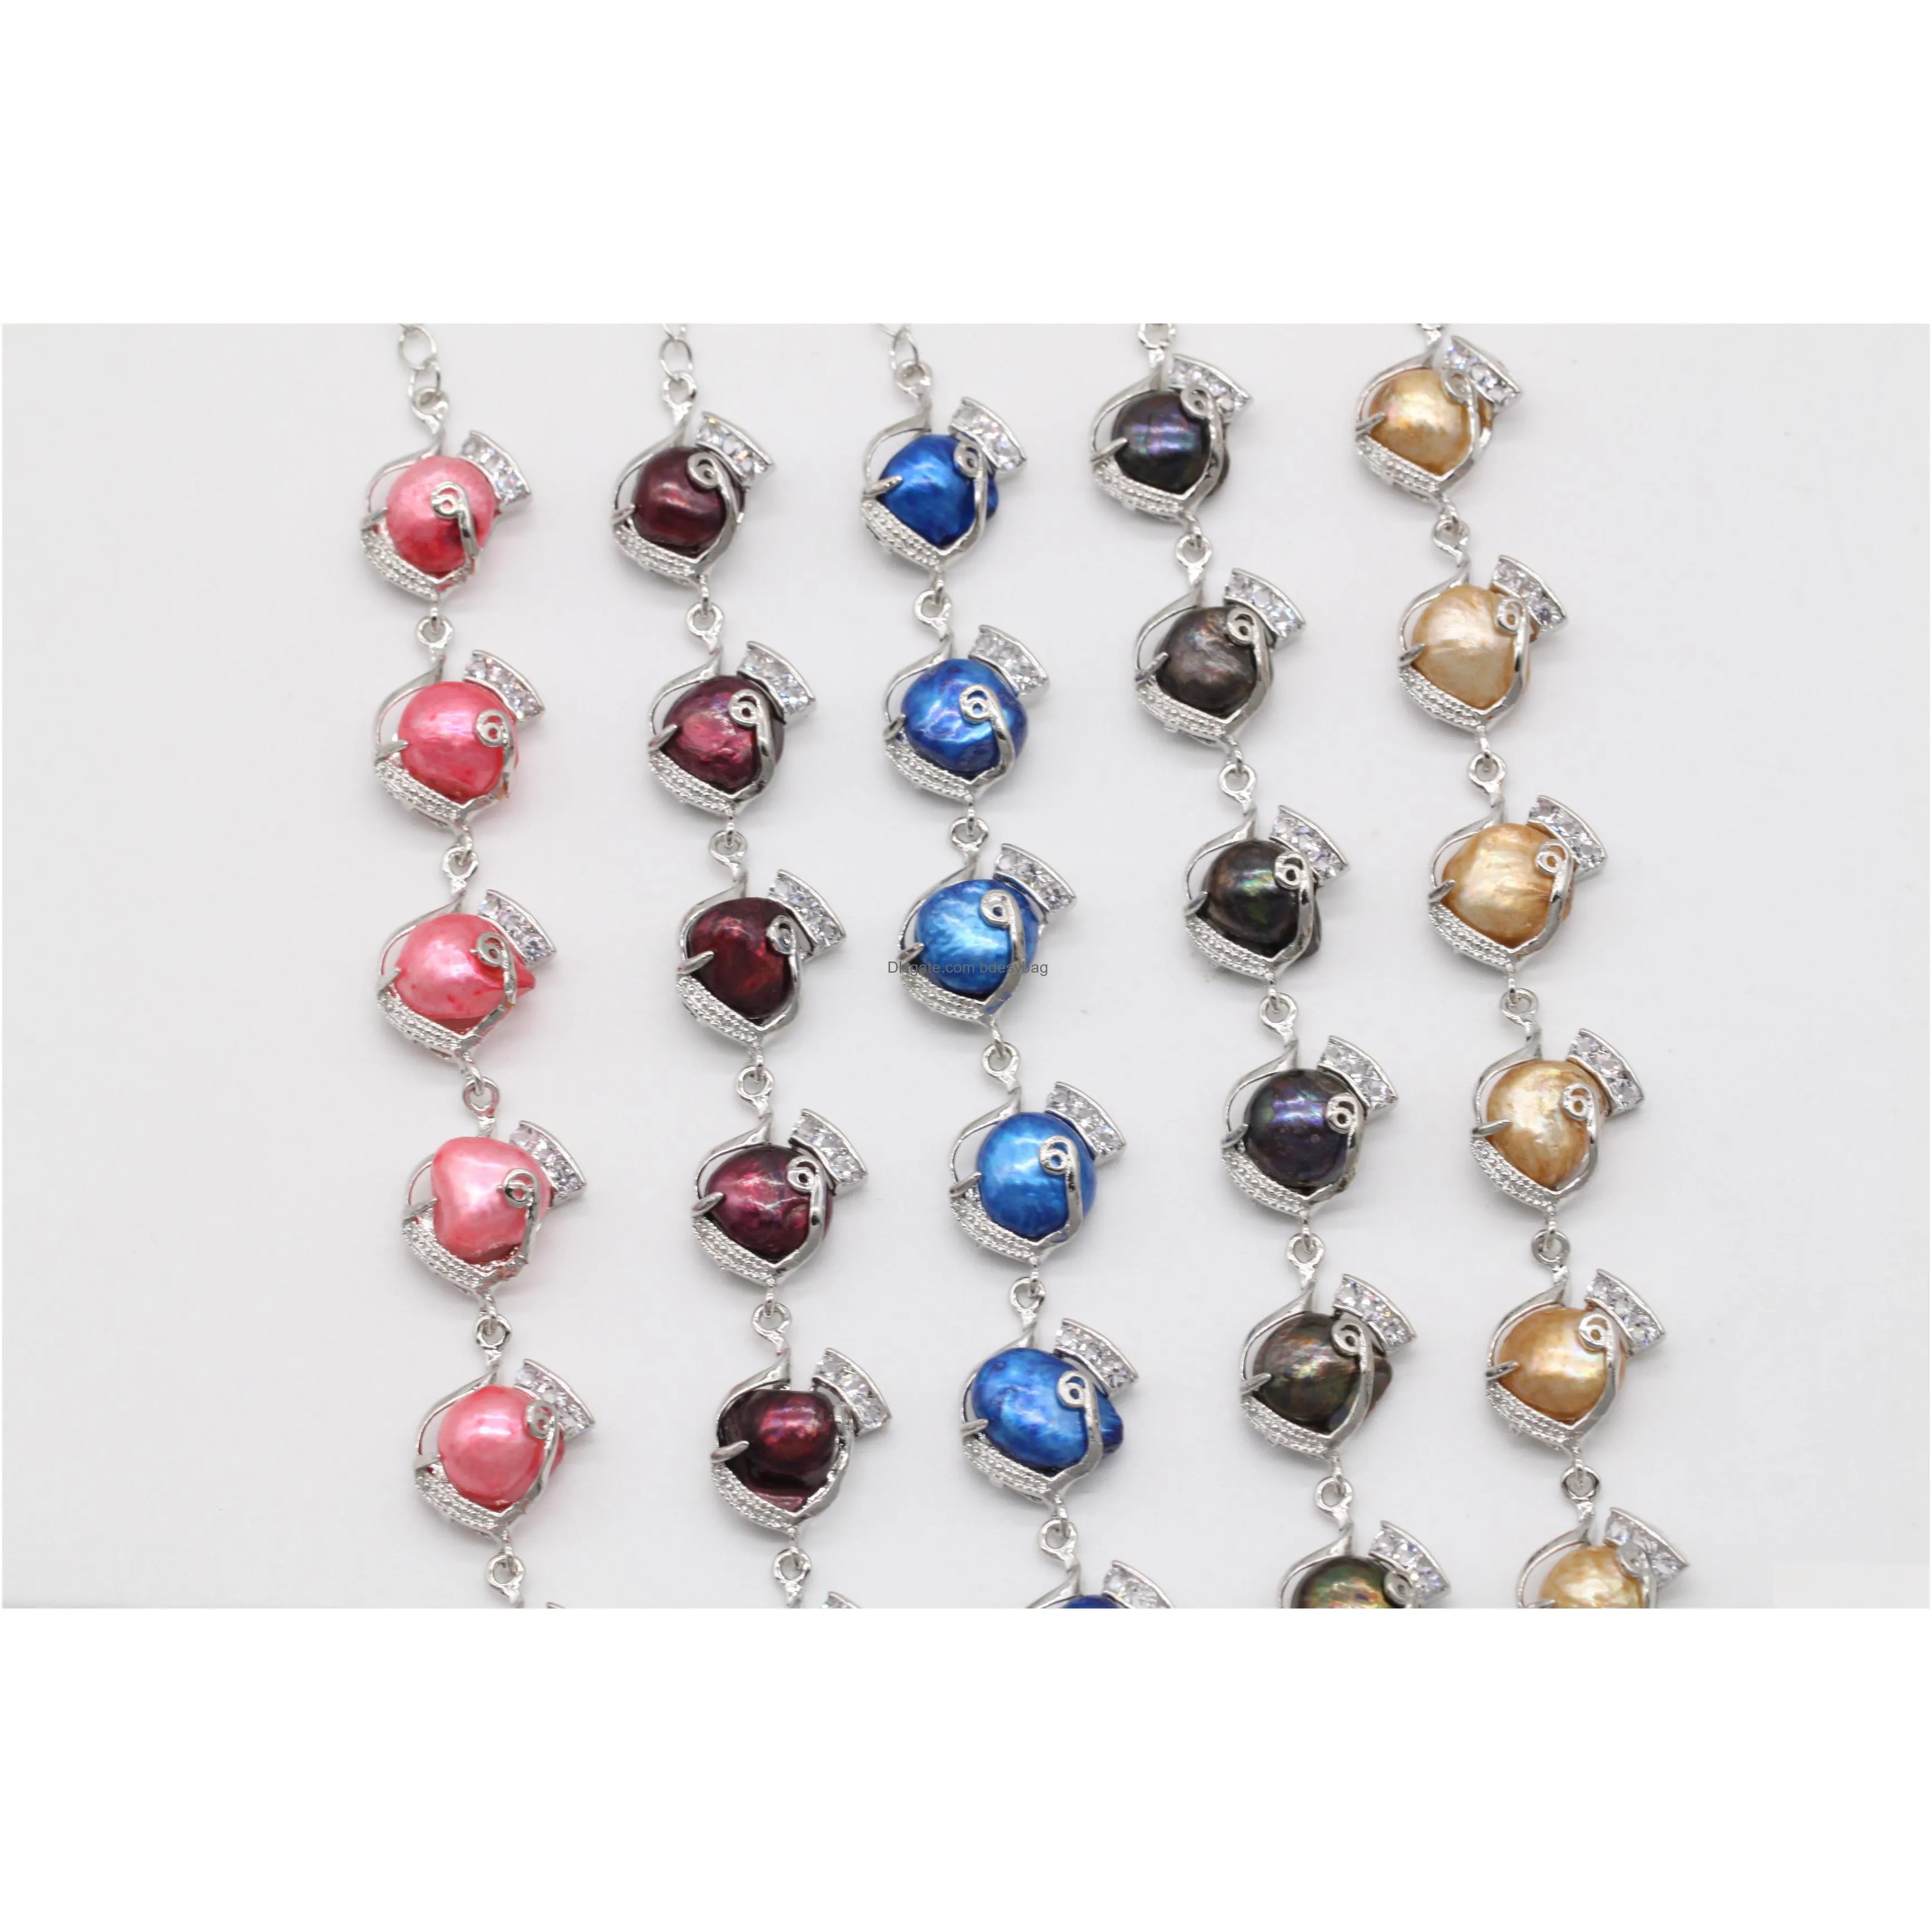 freshwater cultured pearl bracelet silver plated chain with 6 dyed color pearls love wish best gift for women